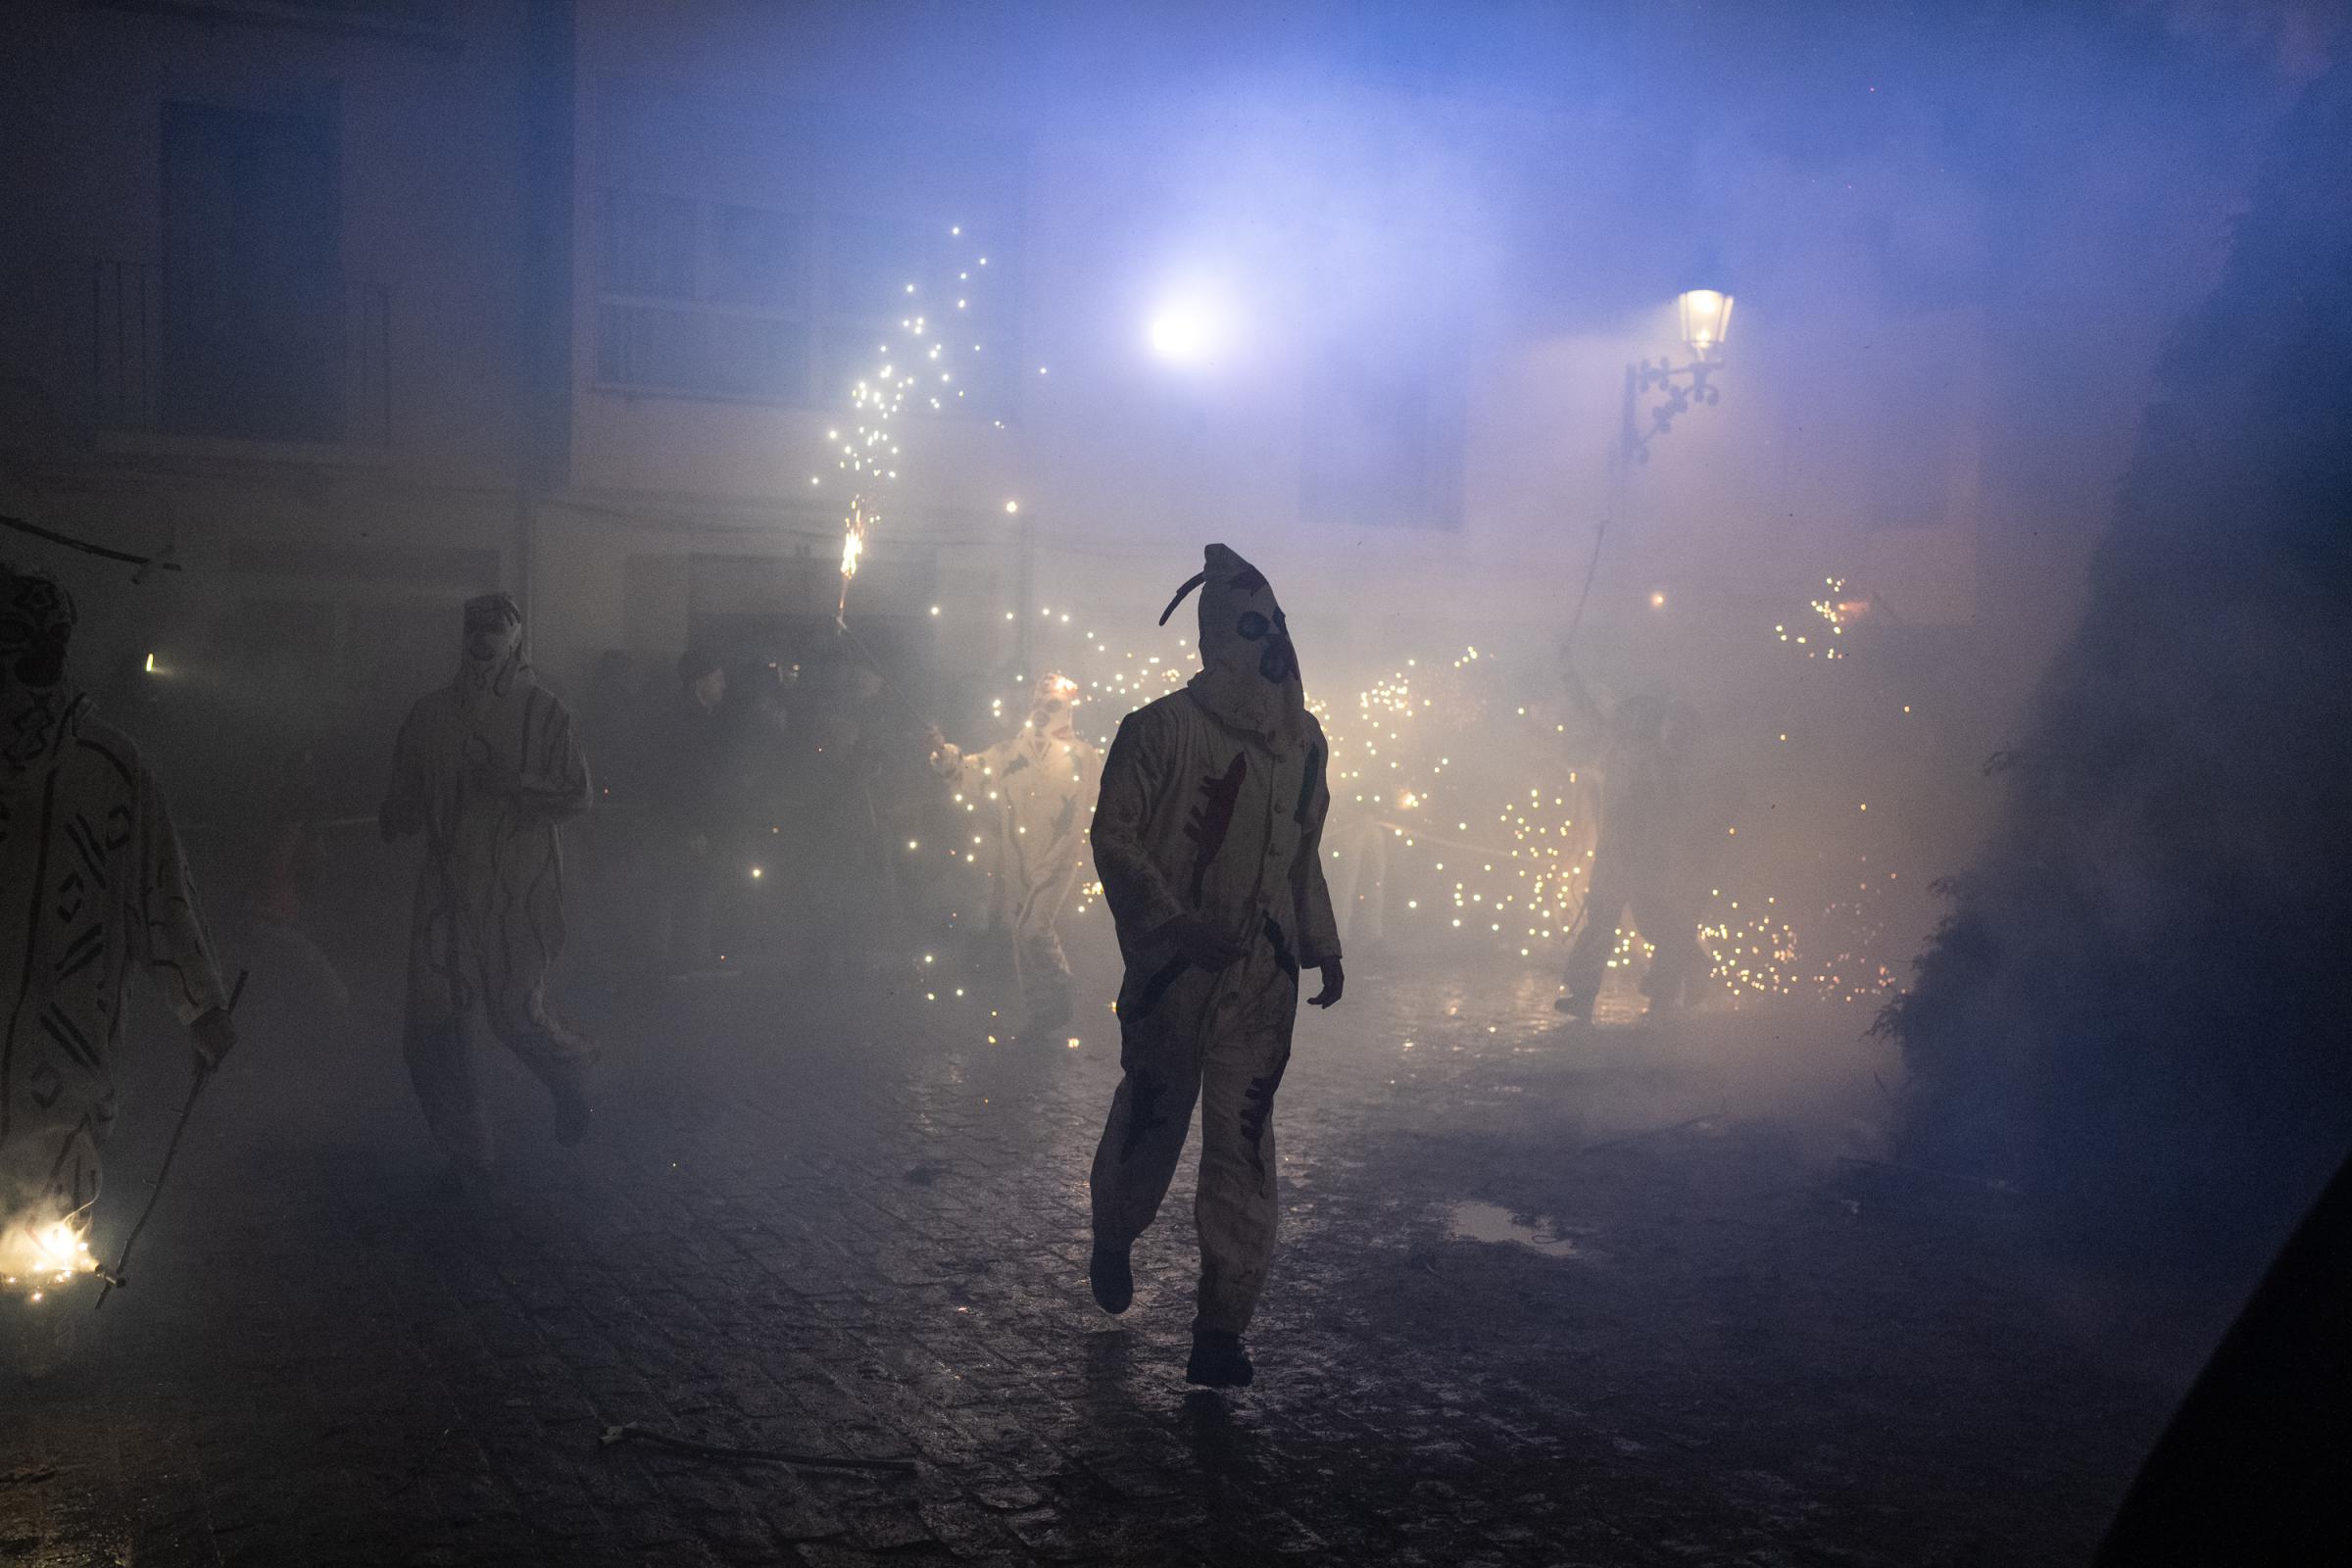 Spanish Villagers Celebrate The Santantona de Forcall, A Medieval Fire Festival - FORCALL, SPAIN - JANUARY 19: The demons set up a small...